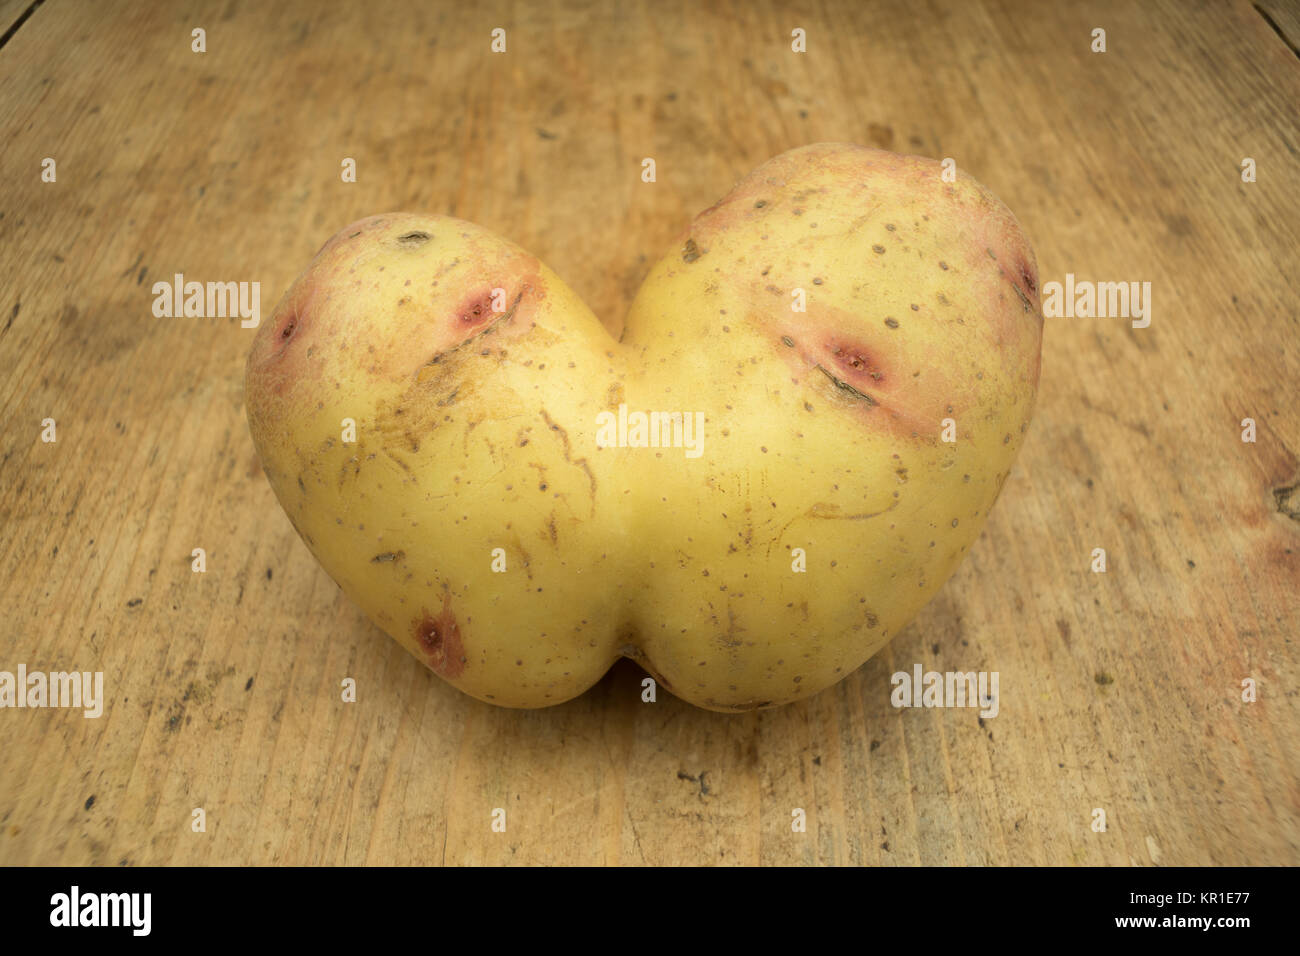 Conjoined Siamese potato on a wooden kitchen table with copy space. Wonky / funny / ugly vegetable or food waste concept. Stock Photo